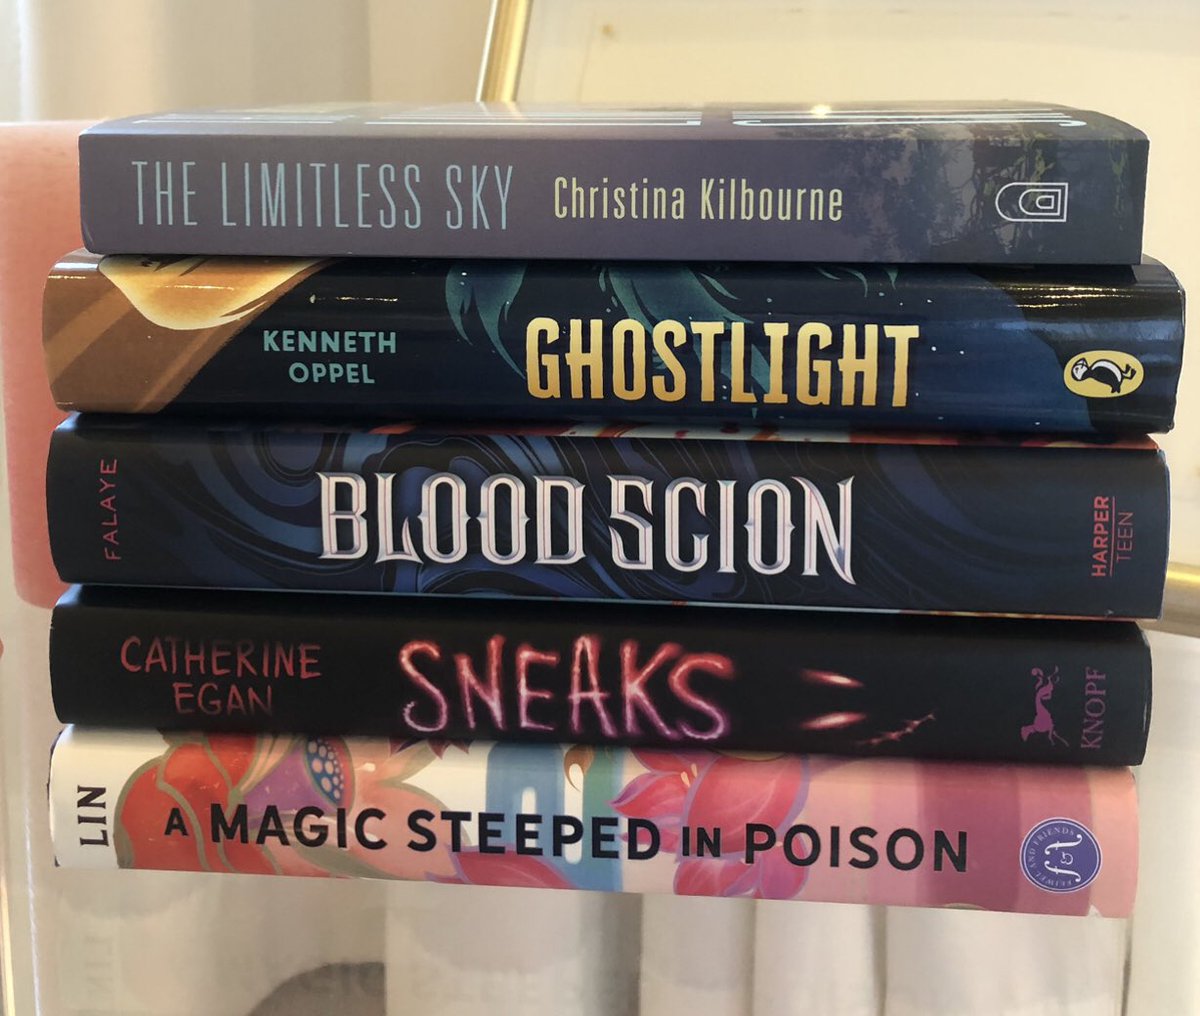 Excited to learn the winner of the #arlenebarlinaward for #sciencefiction and #fantasy at tomorrow’s ceremony hosted by the @kidsbookcentre in Toronto. Best of luck to the nominees! #ya